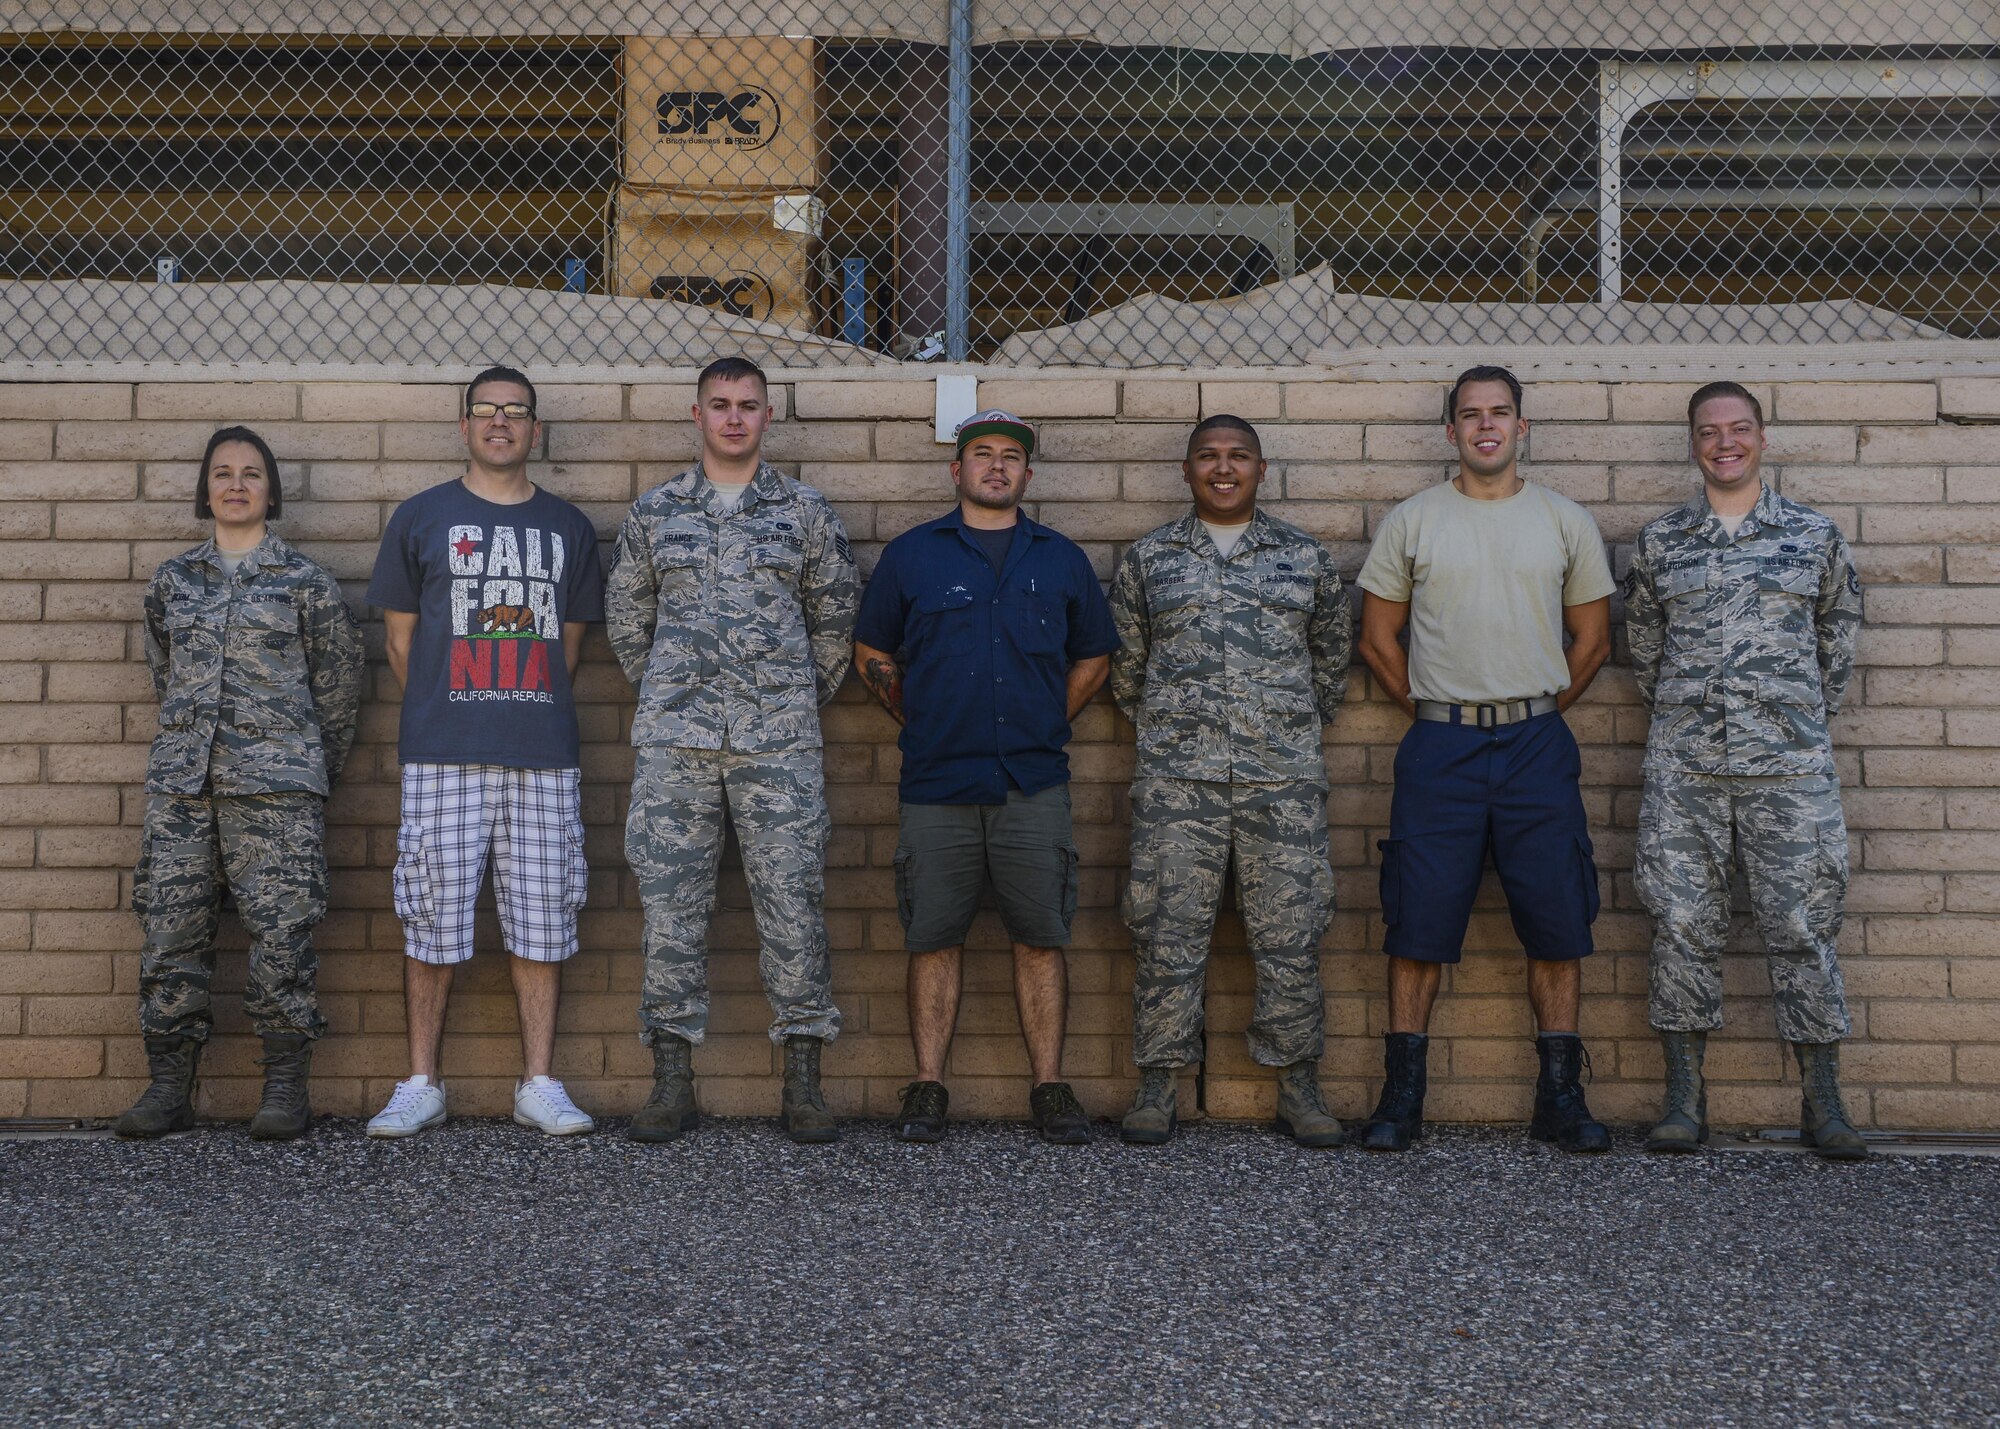 Daniel Villela, 56th Logistics Readiness Squadron mobile equipment mechanic, poses for a portrait with members of his team who helped identify and create a solution for a defect on mission essential equipment Sept. 12, 2017 at Luke Air Force Base, Ariz. Villela was the lead mechanic to provide the steps in reconfiguring and implementing a fix to the pintle hook mechanism for the bobtails that tow the F-35 on the flightline at Luke. (U.S. Air Force photo/Airman 1st Class Caleb Worpel).